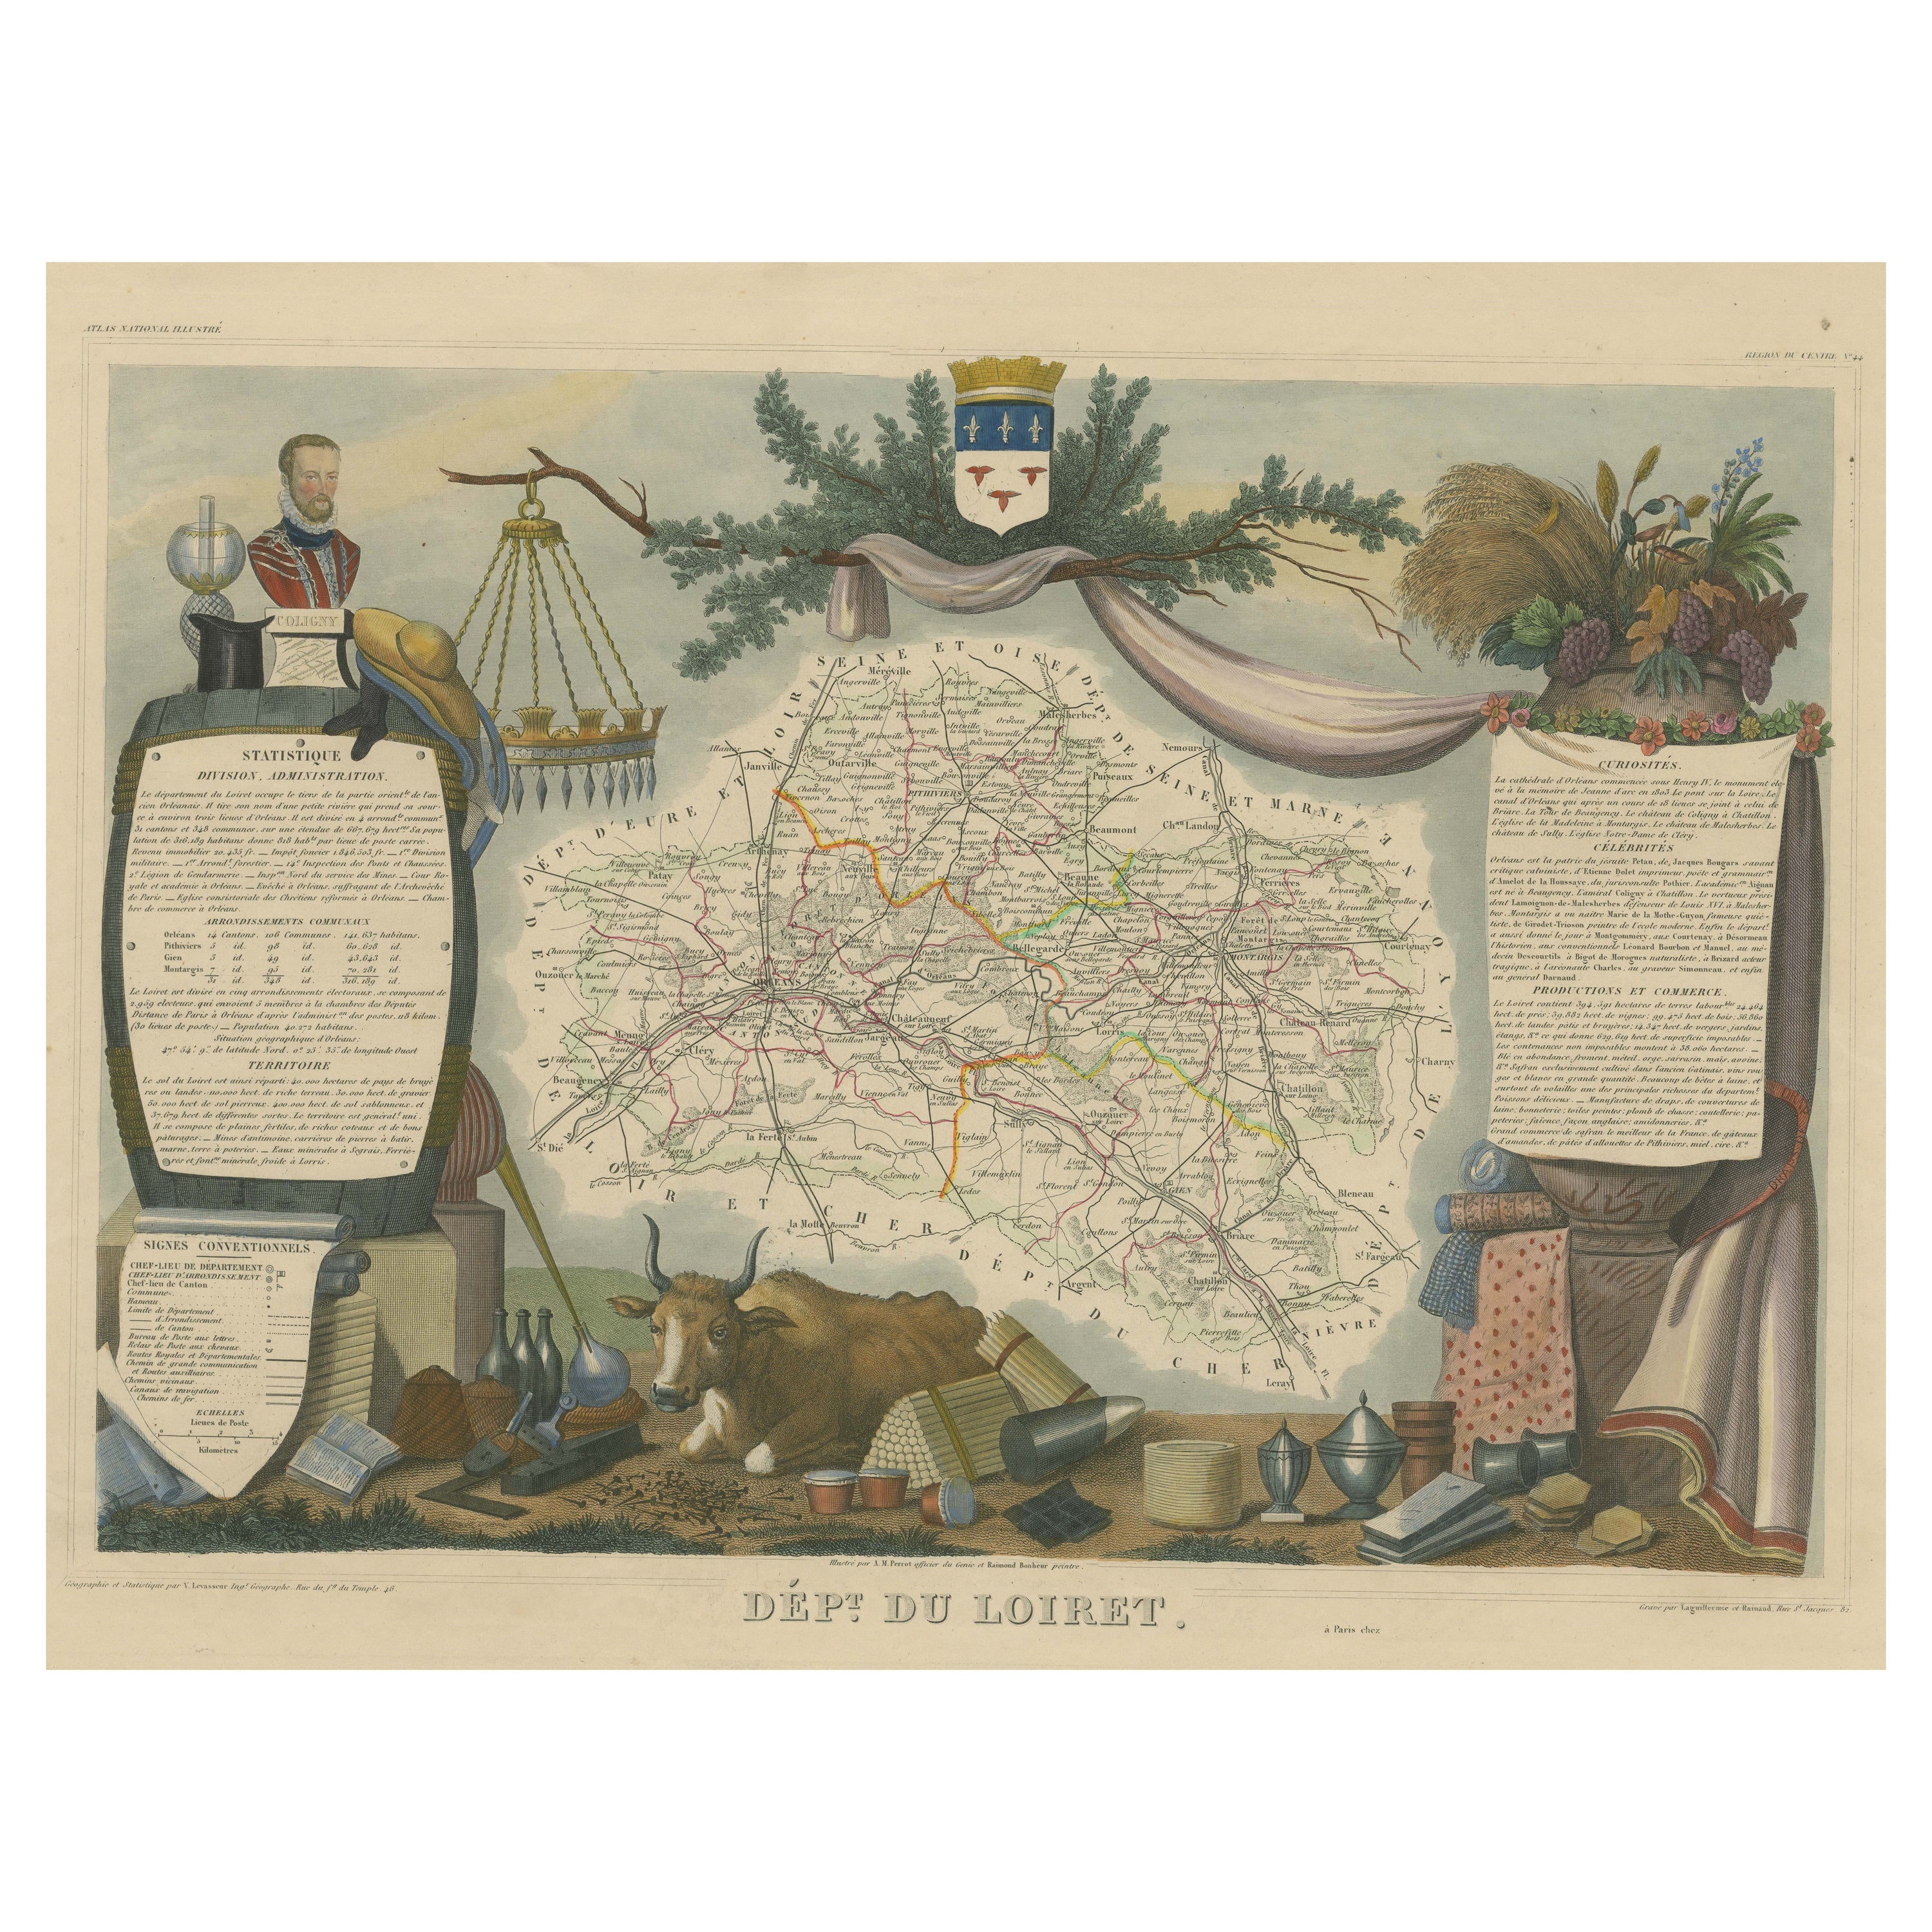 Old Map of the French Department of Loiret, France For Sale